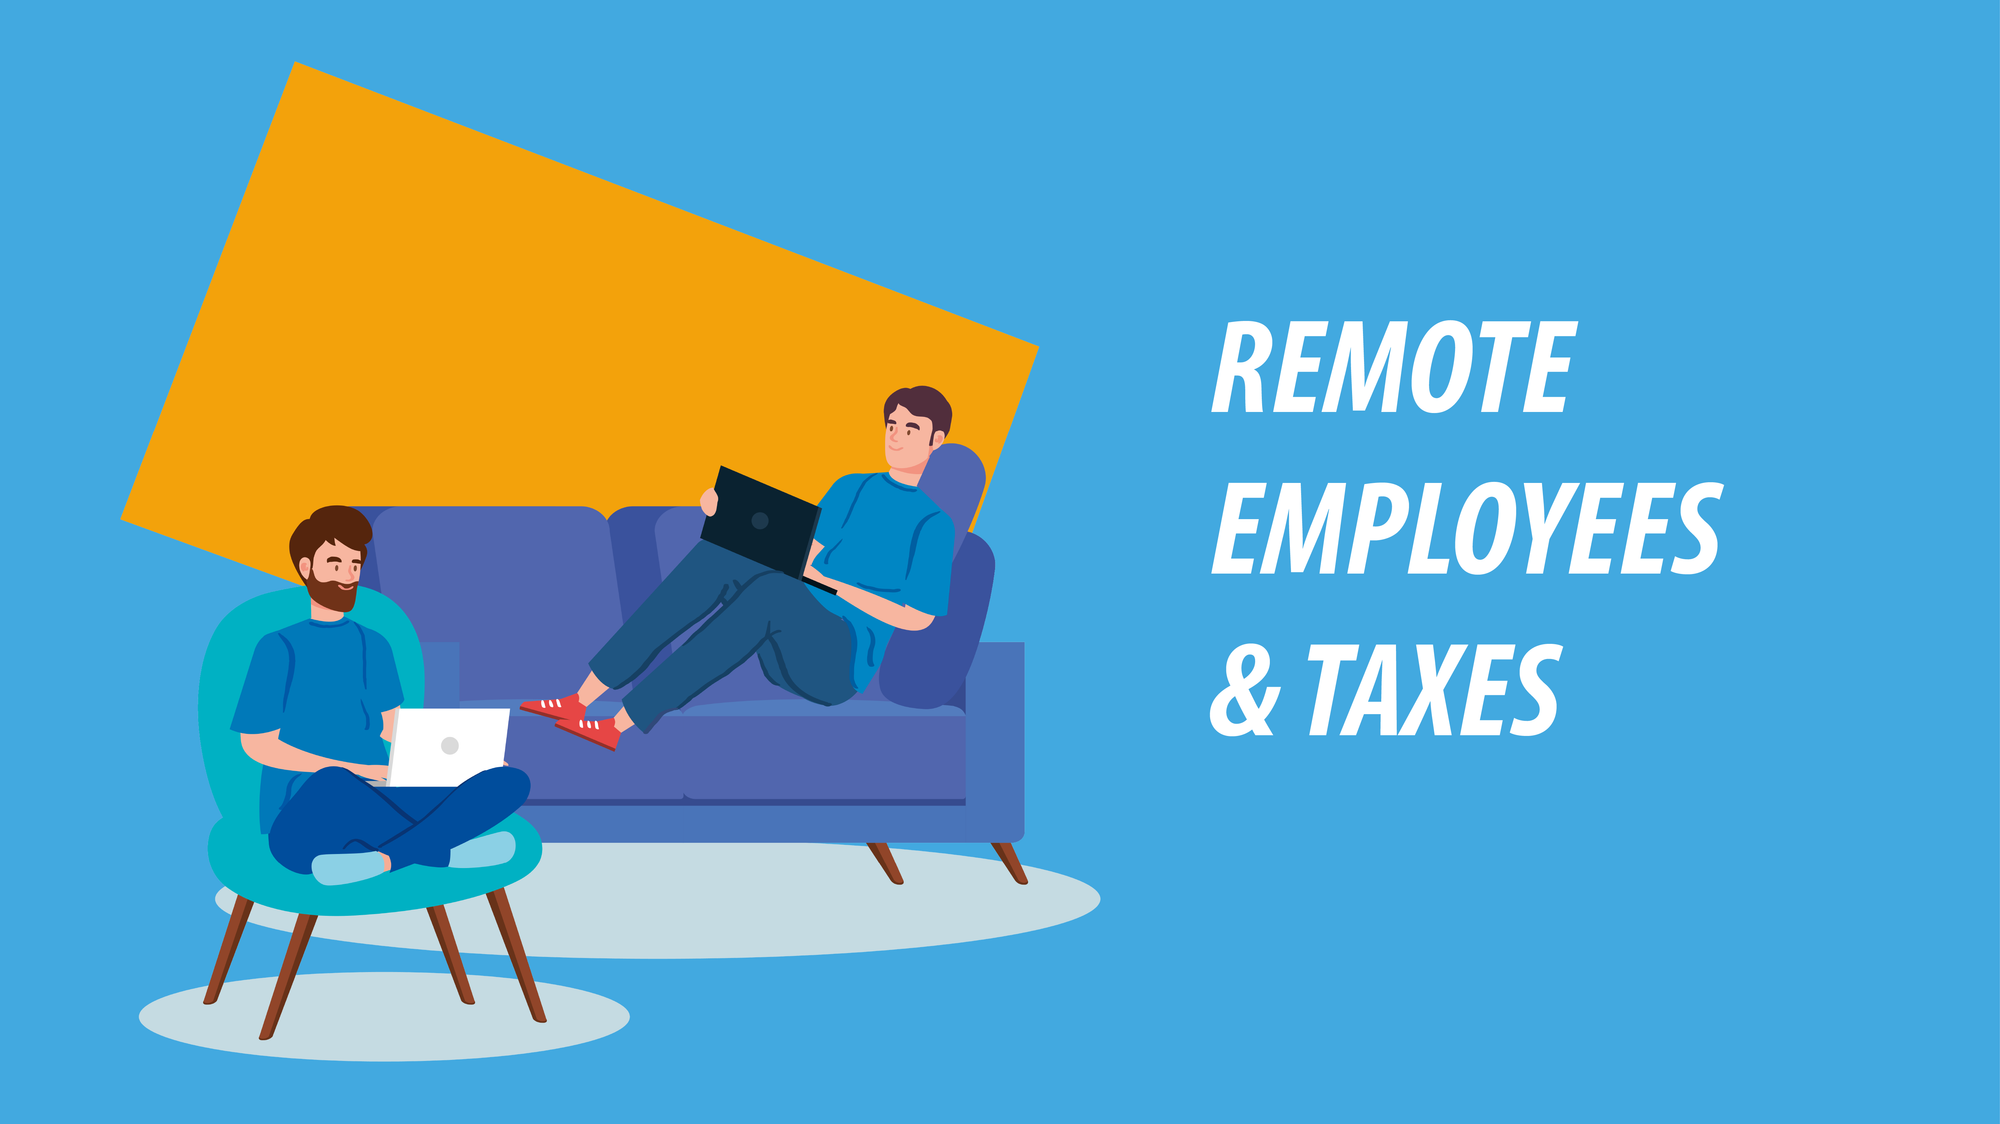 Remote employees and taxes